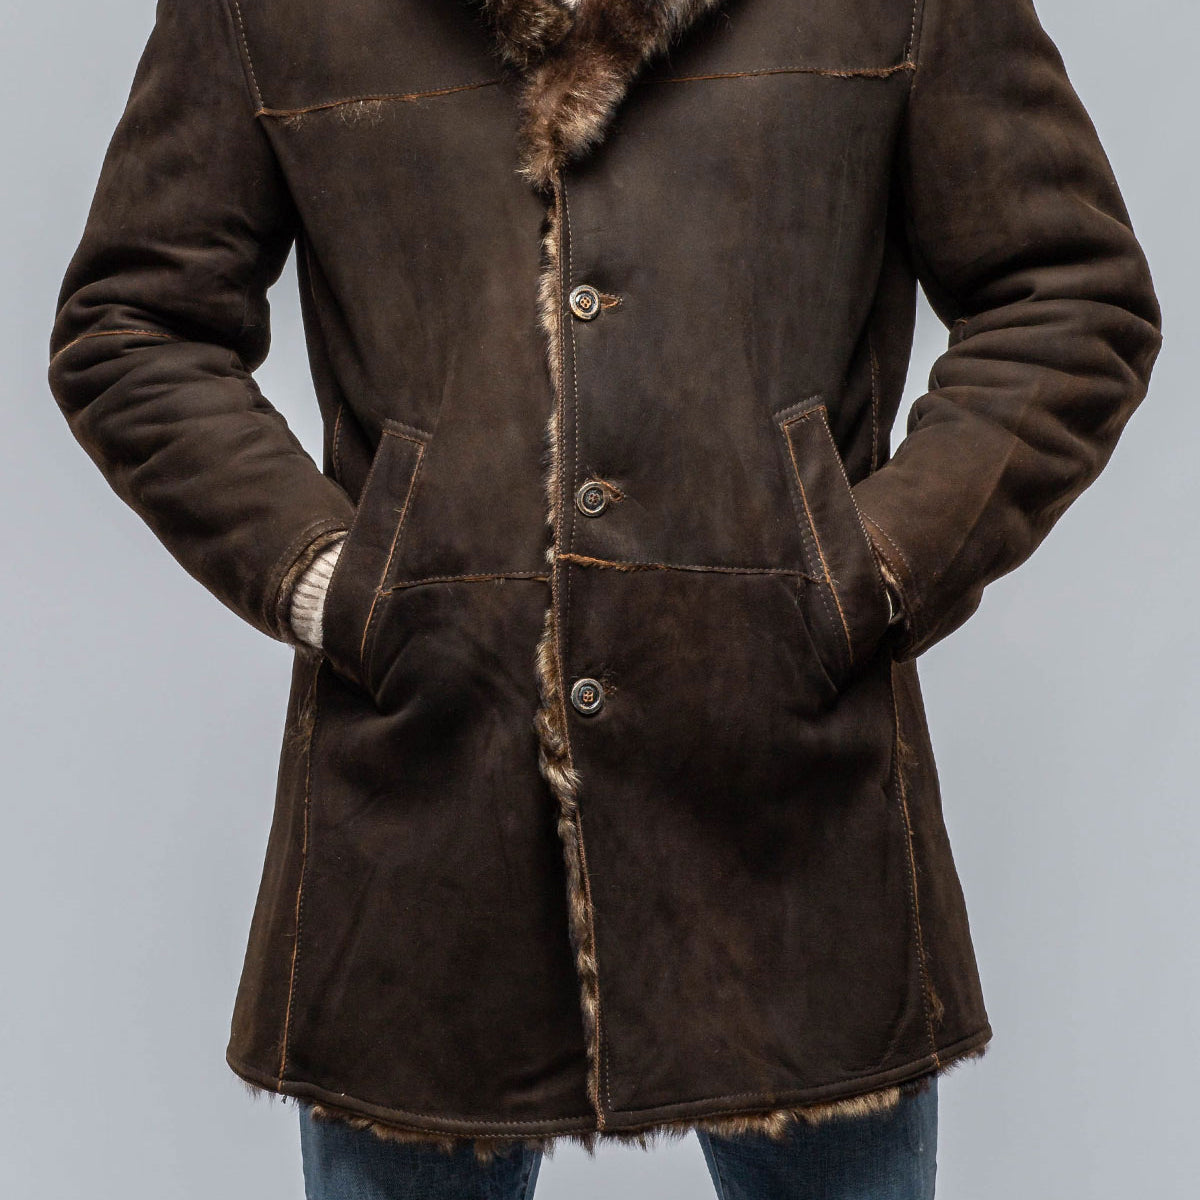 Belvedere Wild Shearling | Samples - Mens - Outerwear - Shearling | Gimo's